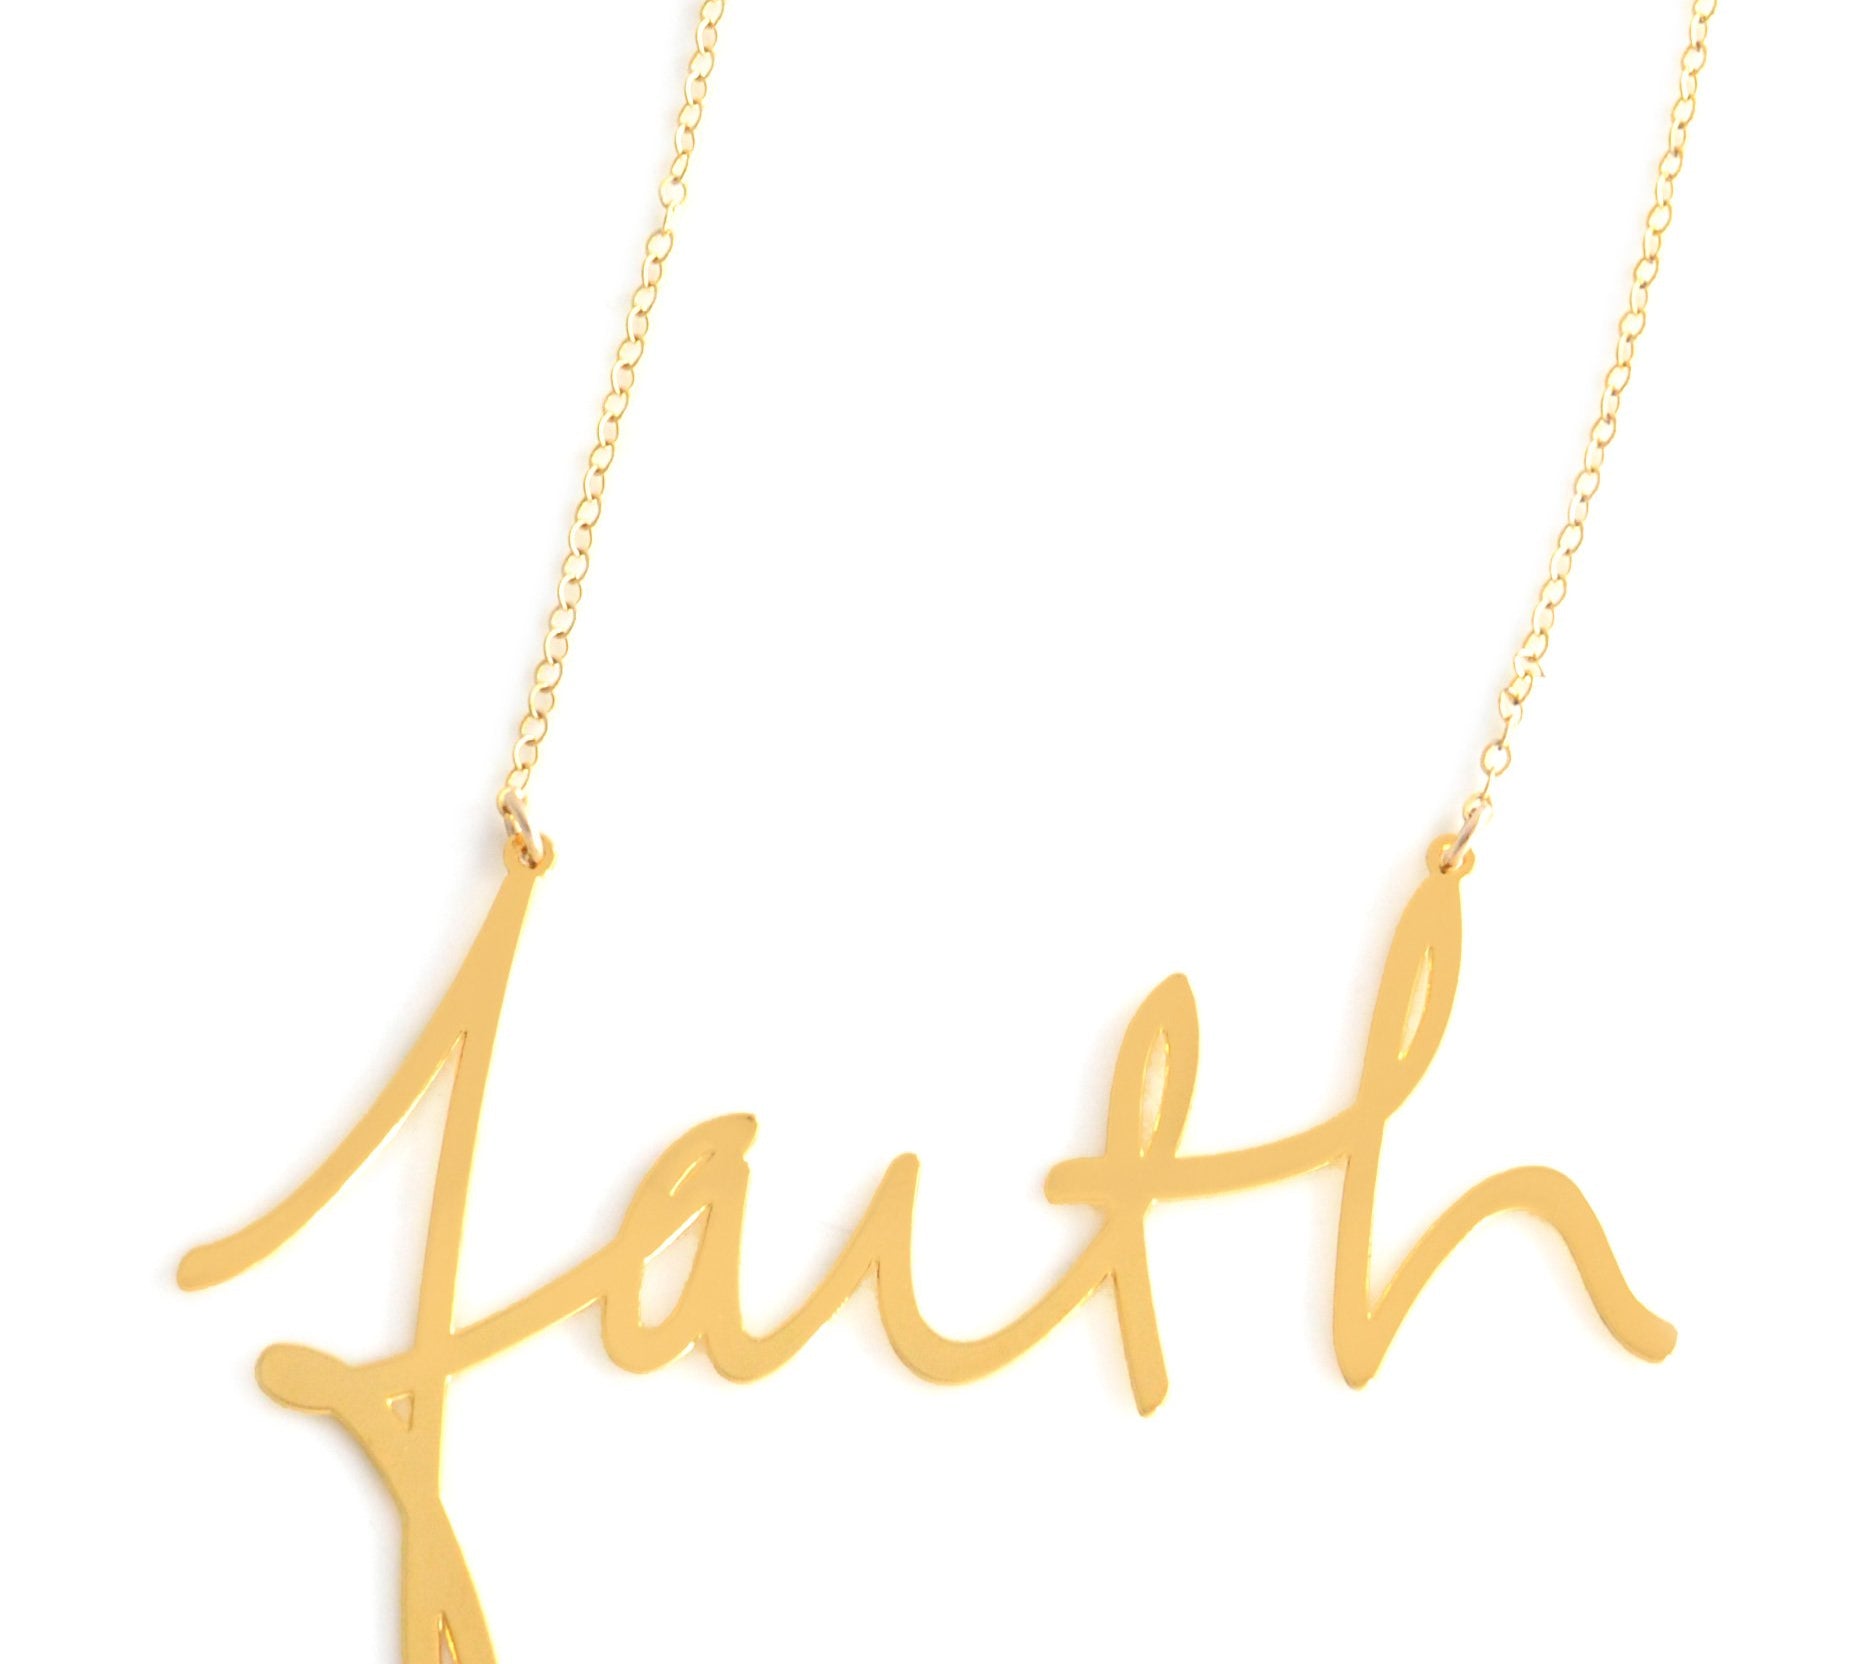 Faith Necklace - High Quality, Affordable, Hand Written, Self Love, Mantra Word Necklace - Available in Gold and Silver - Small and Large Sizes - Made in USA - Brevity Jewelry